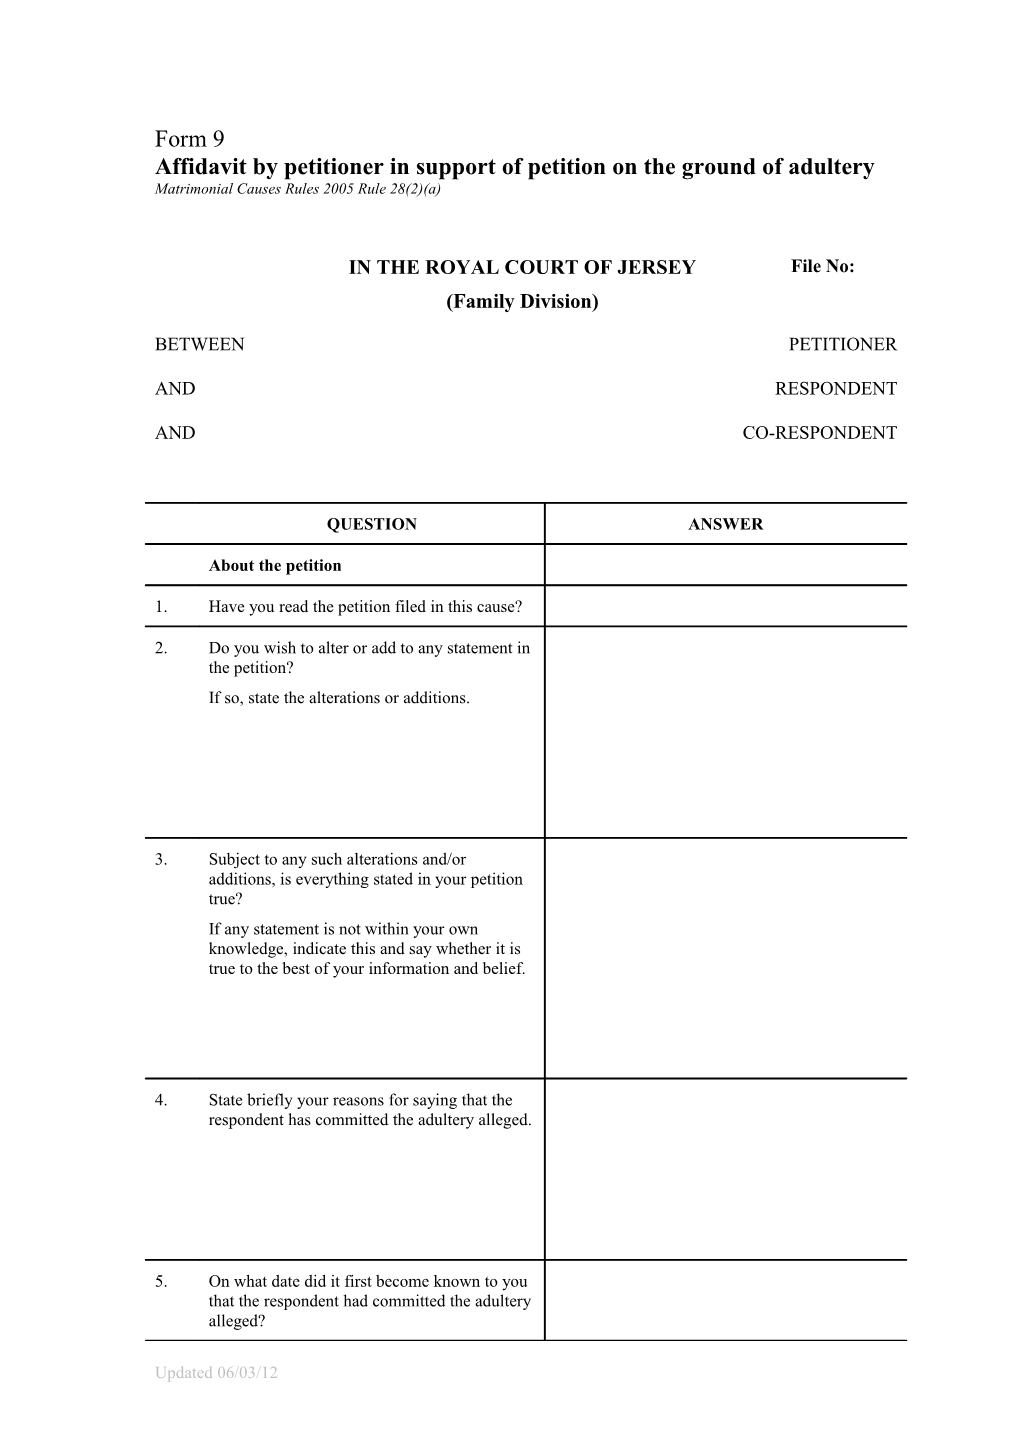 Form 9 - Affidavit by Petitioner in Support of Petition on the Ground of Adultery